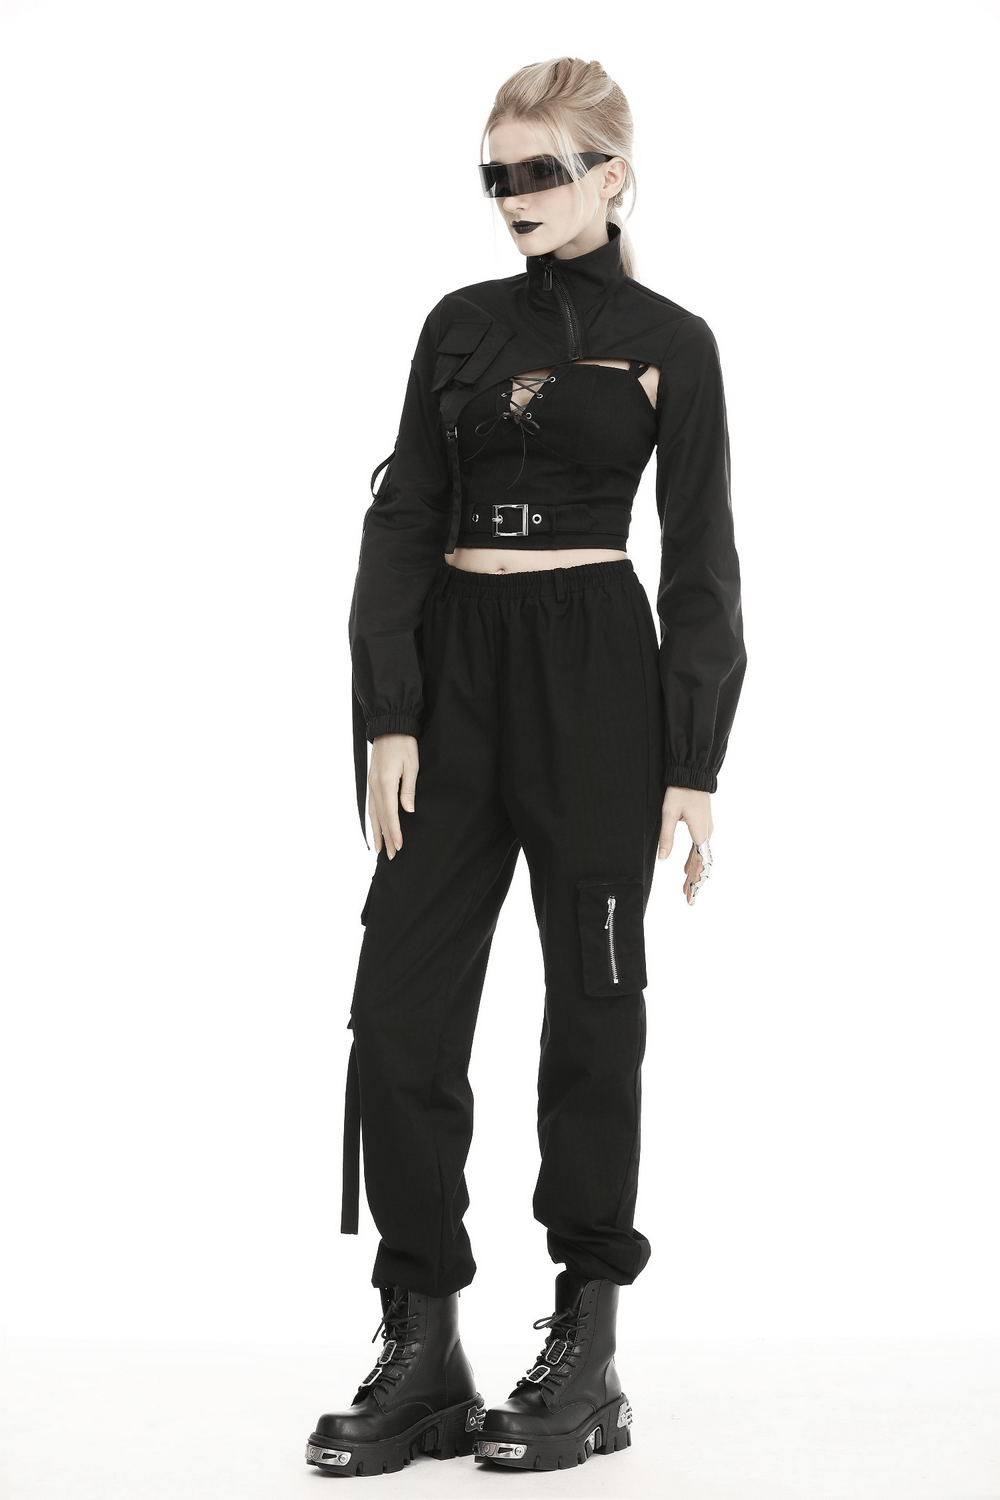 Edgy Long Sleeves Crop Jacket with Zipper and Pockets